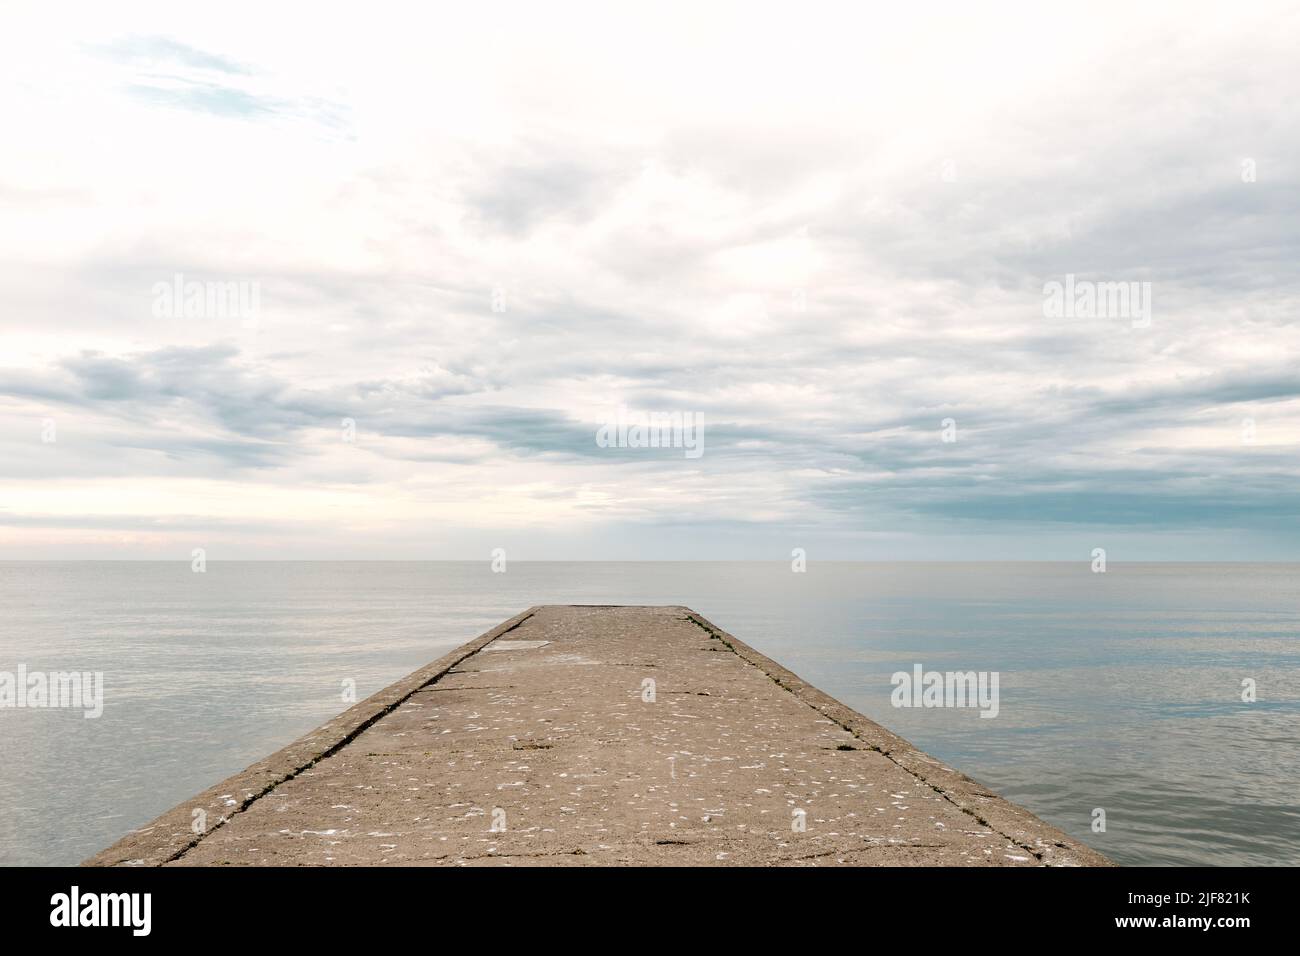 Empty concrete pier to the sea with dramatic sky and calm water, abandoned industrial jetty Stock Photo